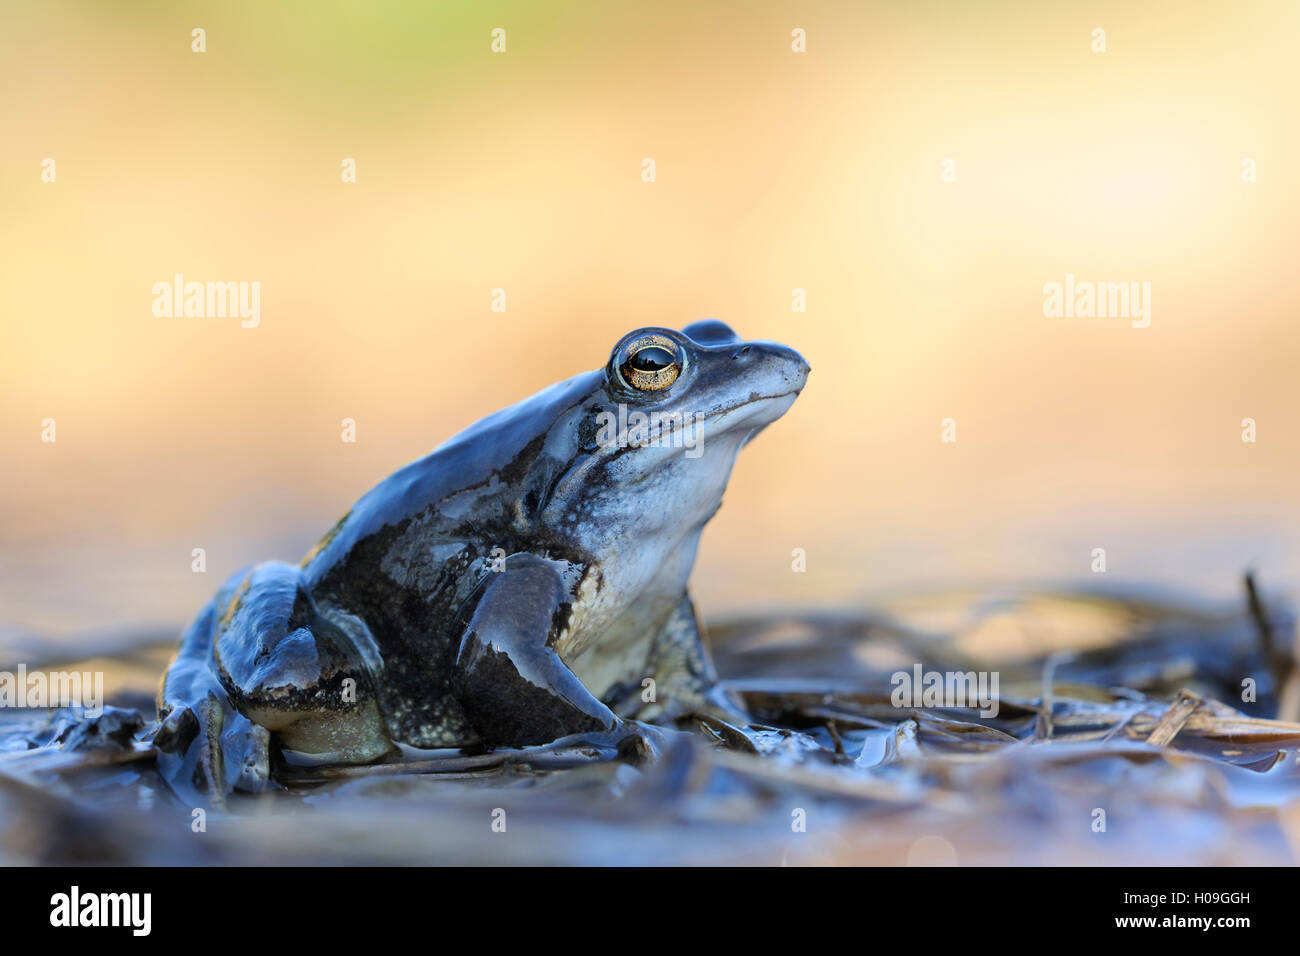 Moor Frog / Moorfosch ( Rana arvalis ), blue colored male, sitting on flotsam during its mating season in spring. Stock Photo